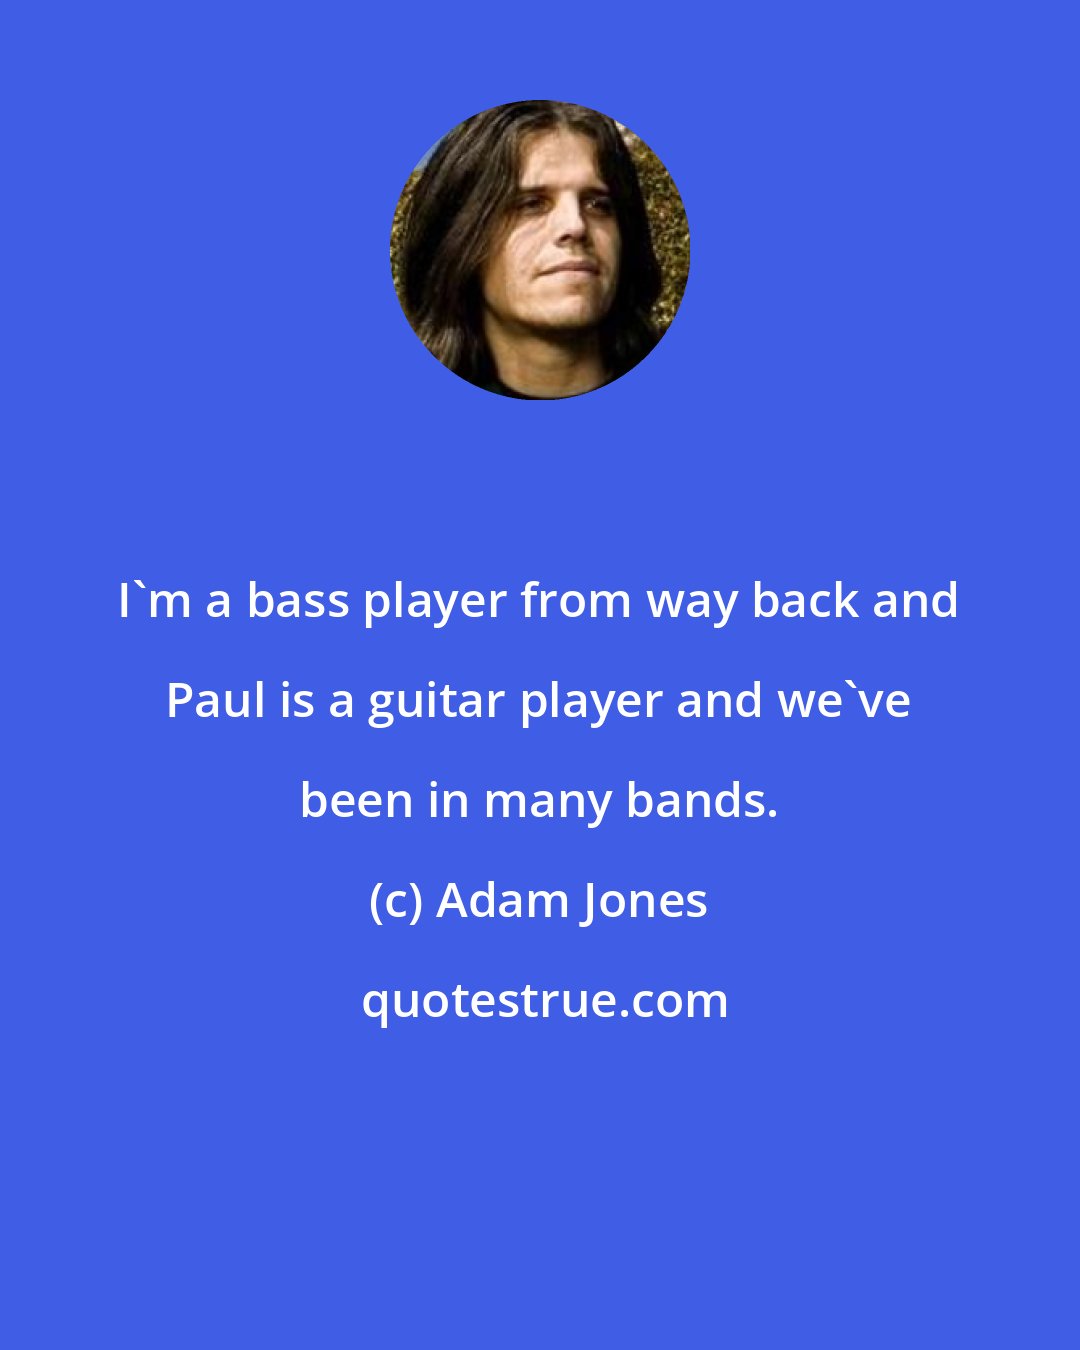 Adam Jones: I'm a bass player from way back and Paul is a guitar player and we've been in many bands.